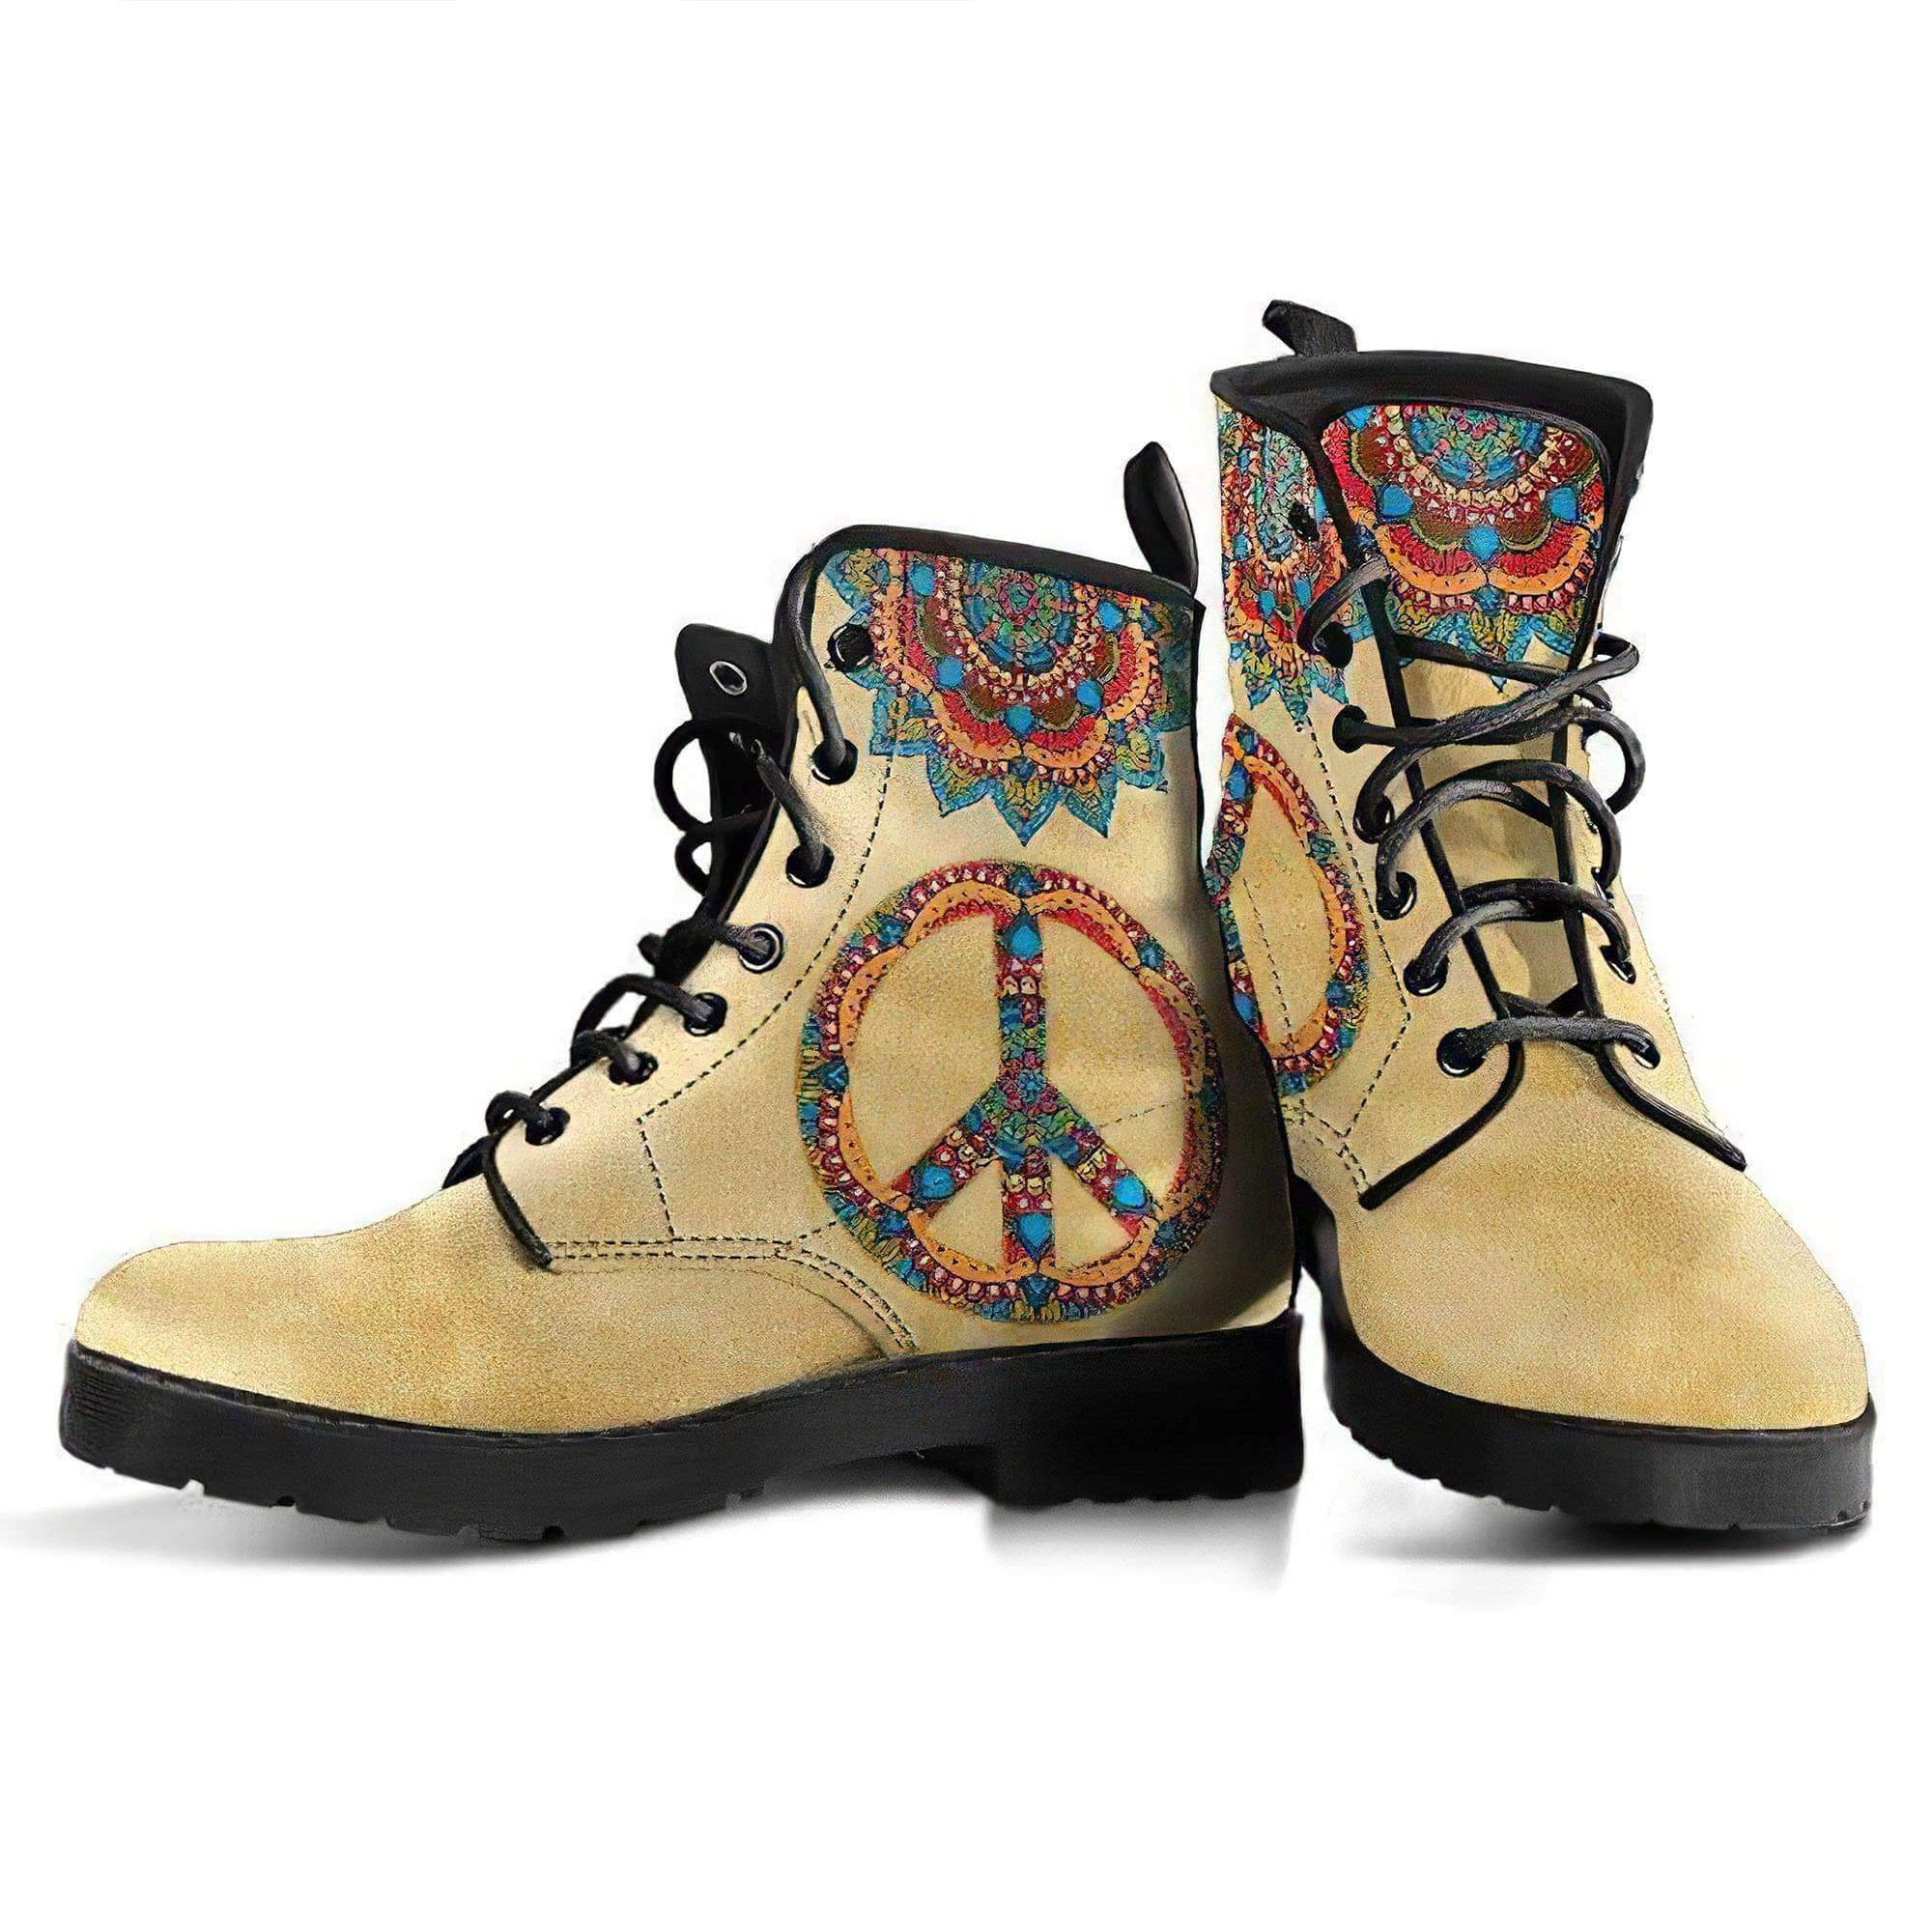 peace-mandala-beige-handcrafted-boots-women-s-leather-boots-12054400499773.jpg